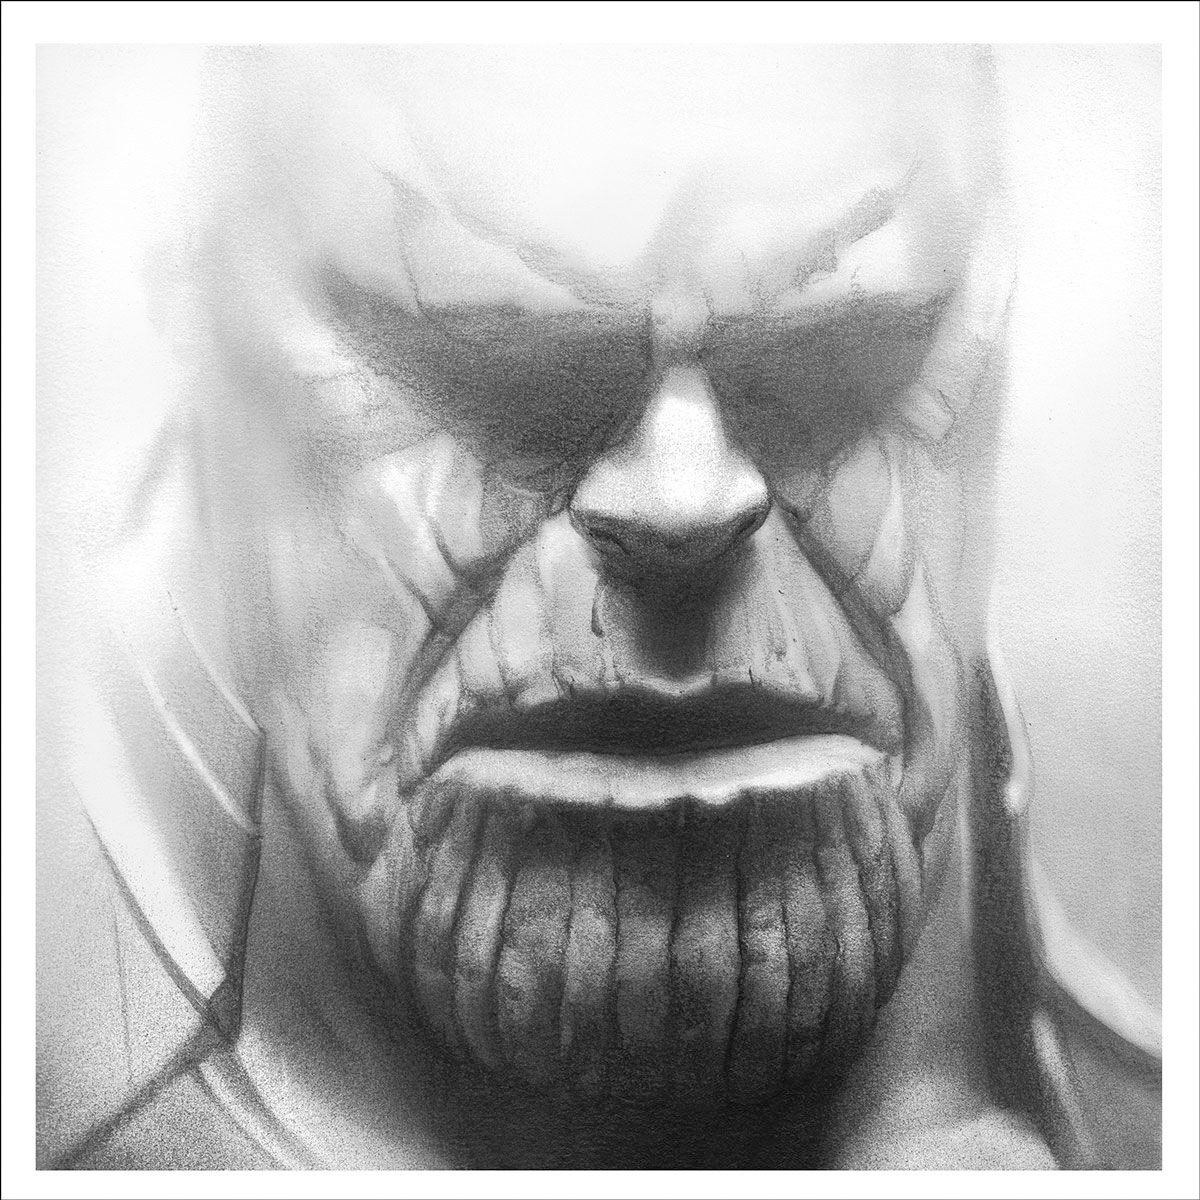 Bronze O. reccomend daddy thanos sticks fingers kanye wests